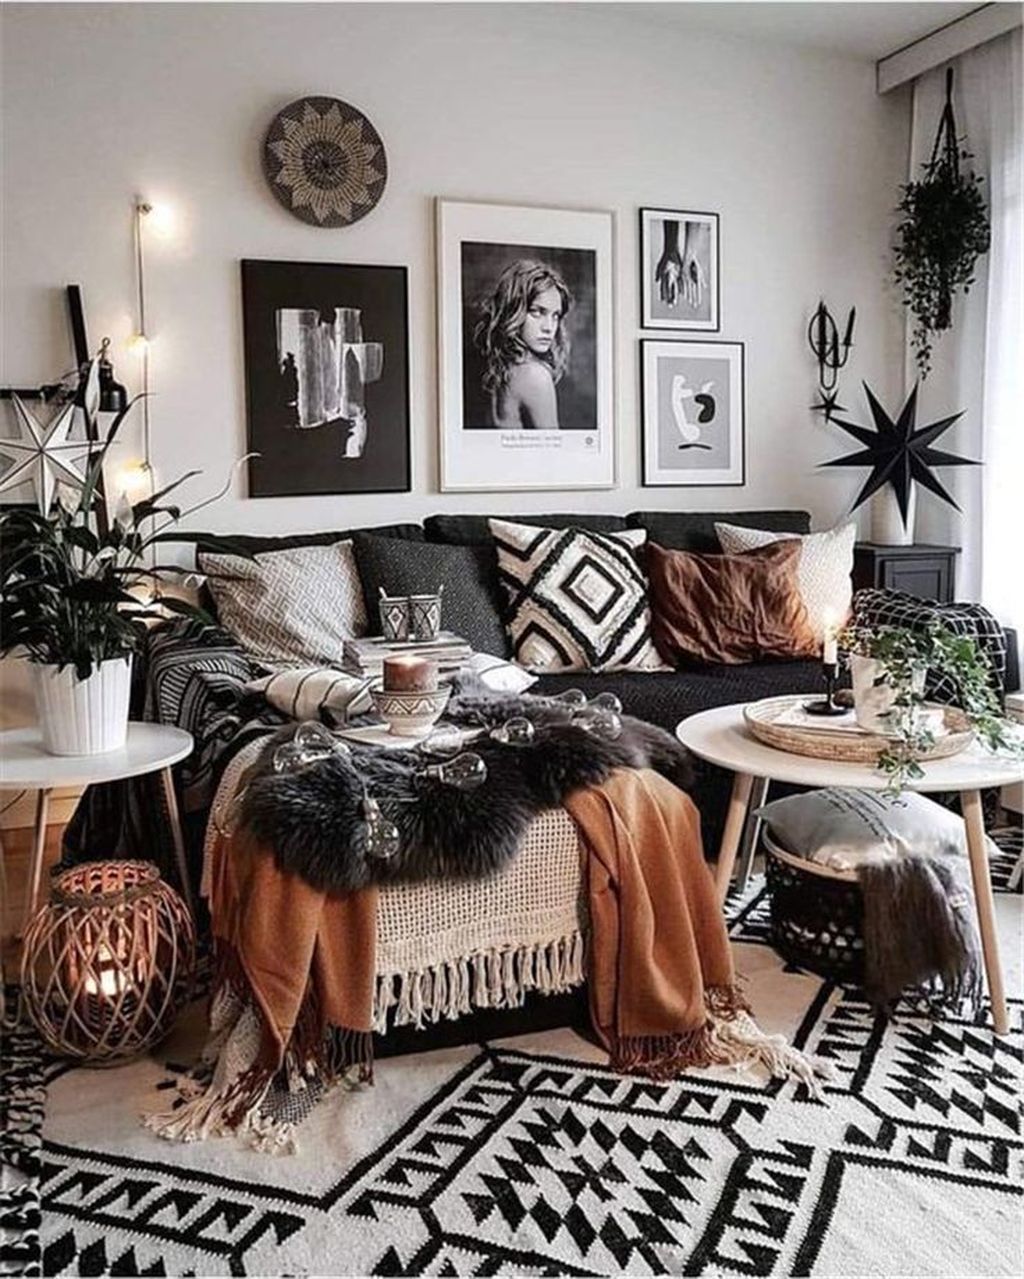 Bohemian Style Home Decor: Top Ideas For A Free Spirited And Artistic Ambiance